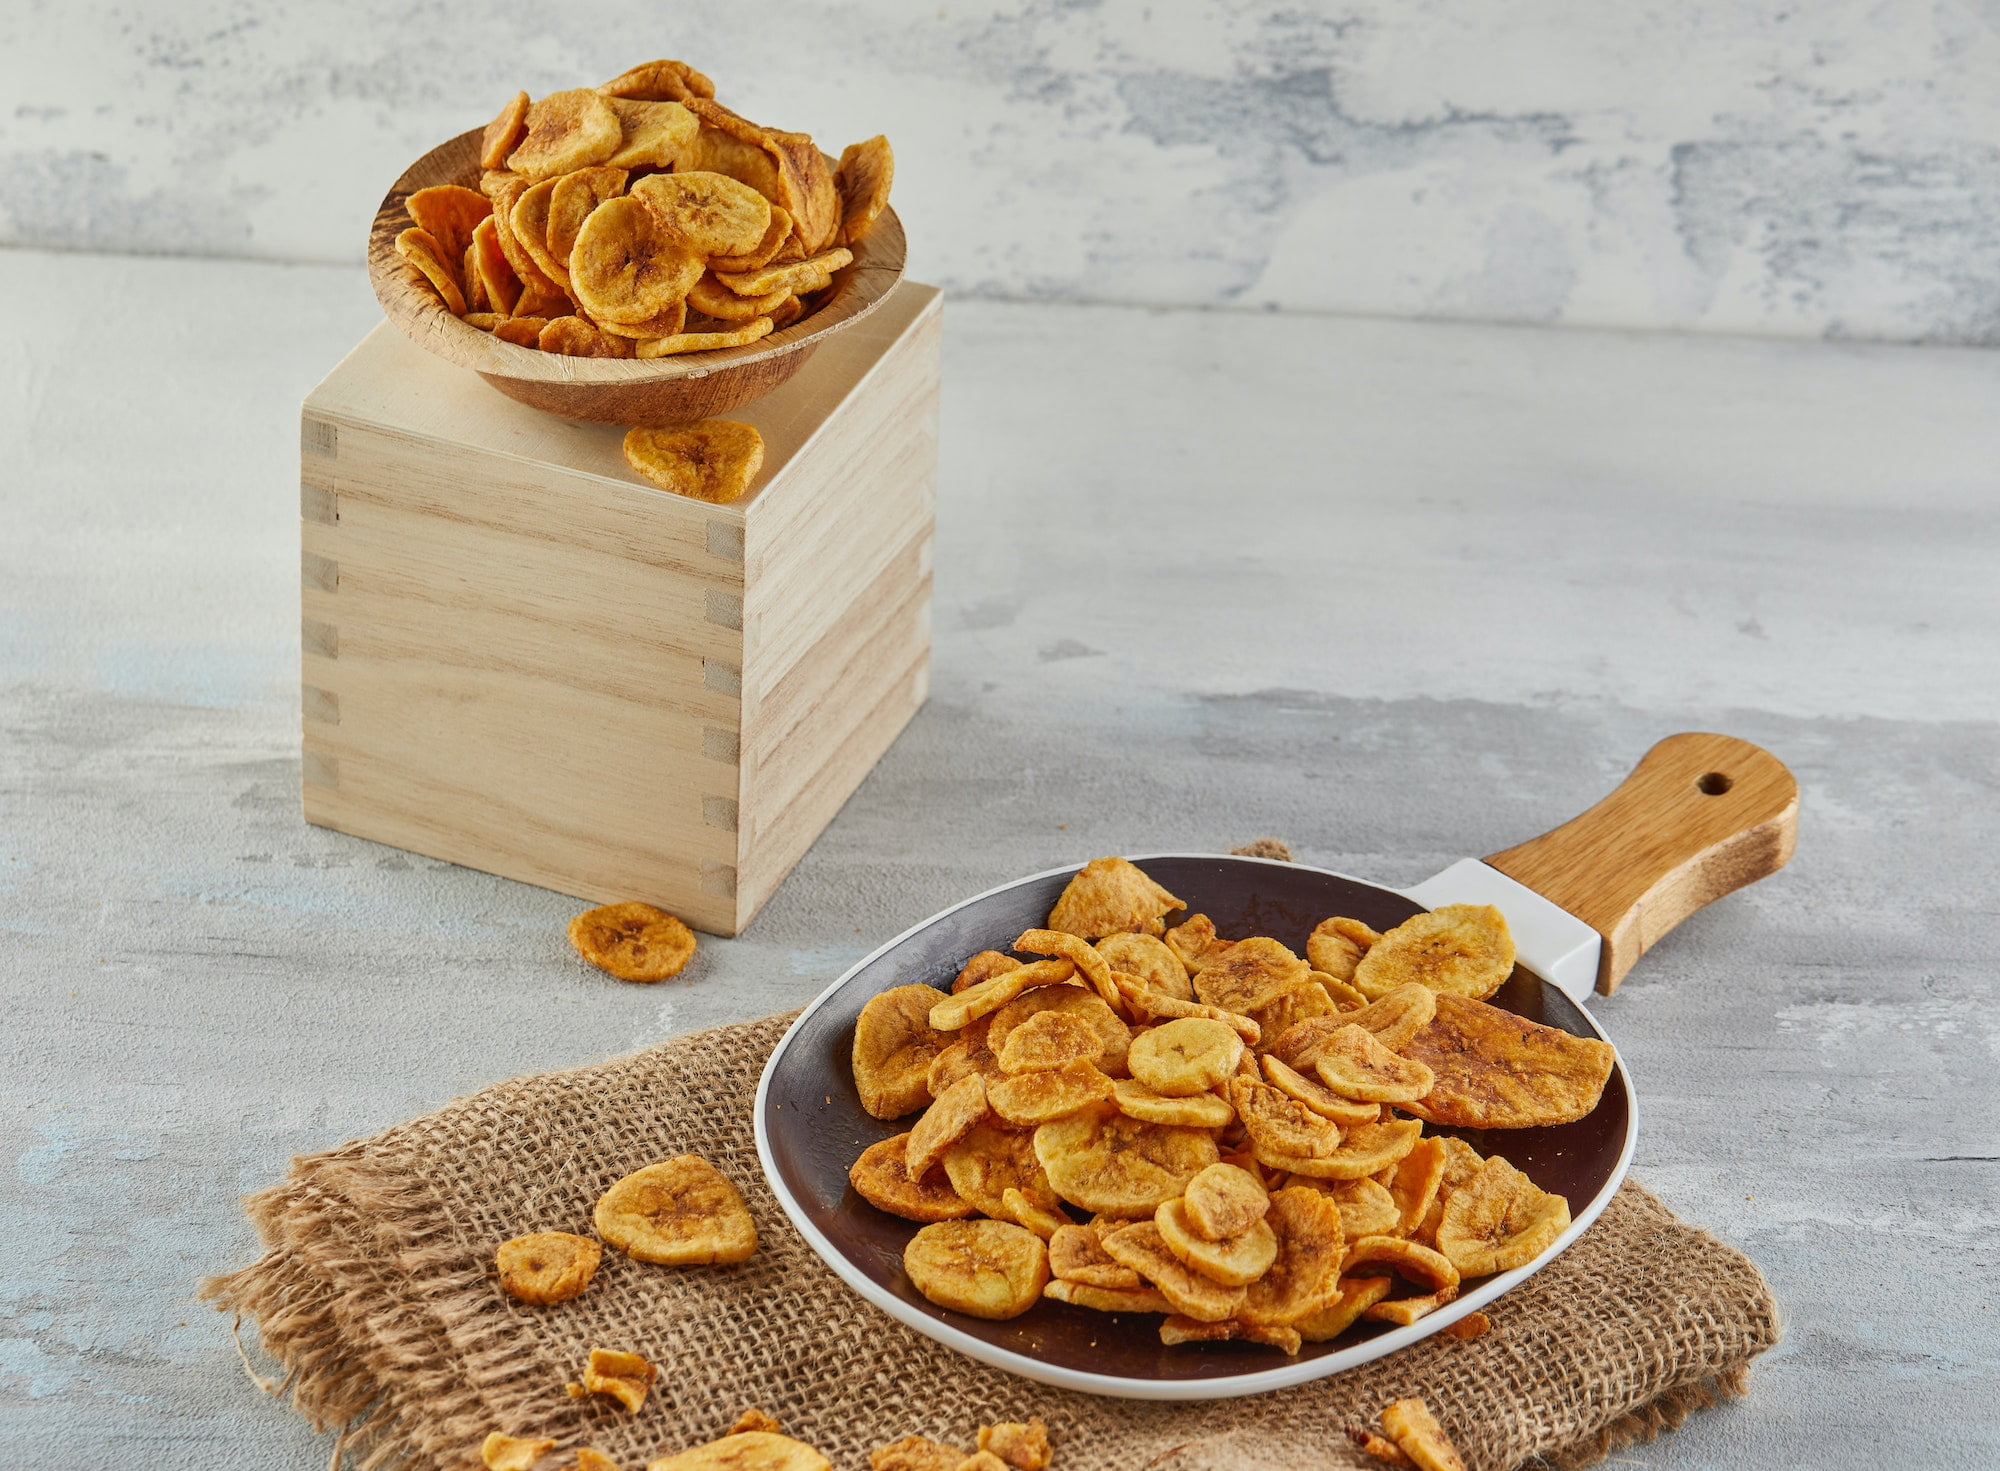 Banana chips healthy food, dry fruit and healthy vegetable chips, healthy vegan snacks